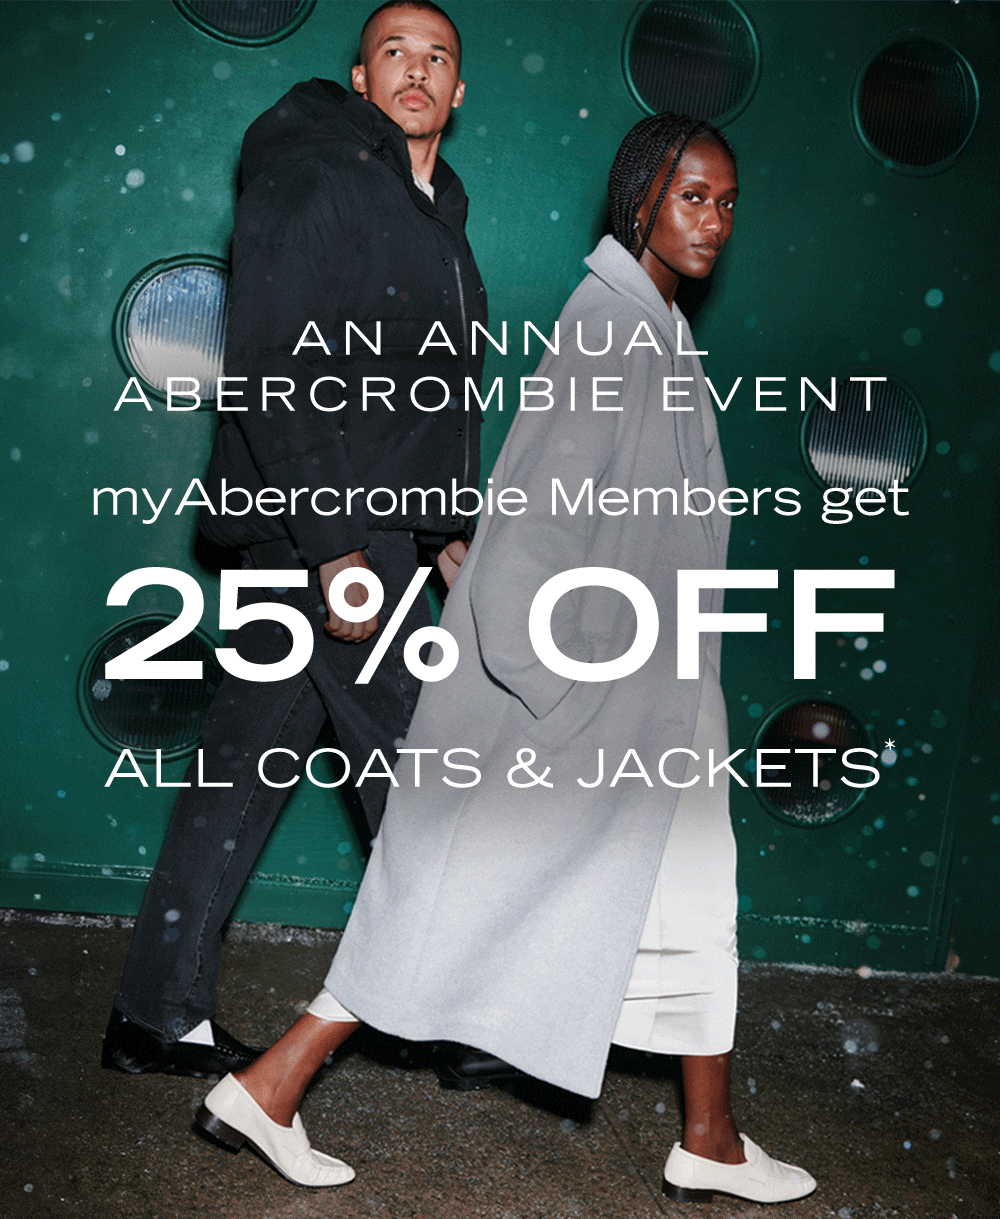 AN ANNUAL ABERCROMBIE EVENT 25% OFF ALL COATS & JACKETS